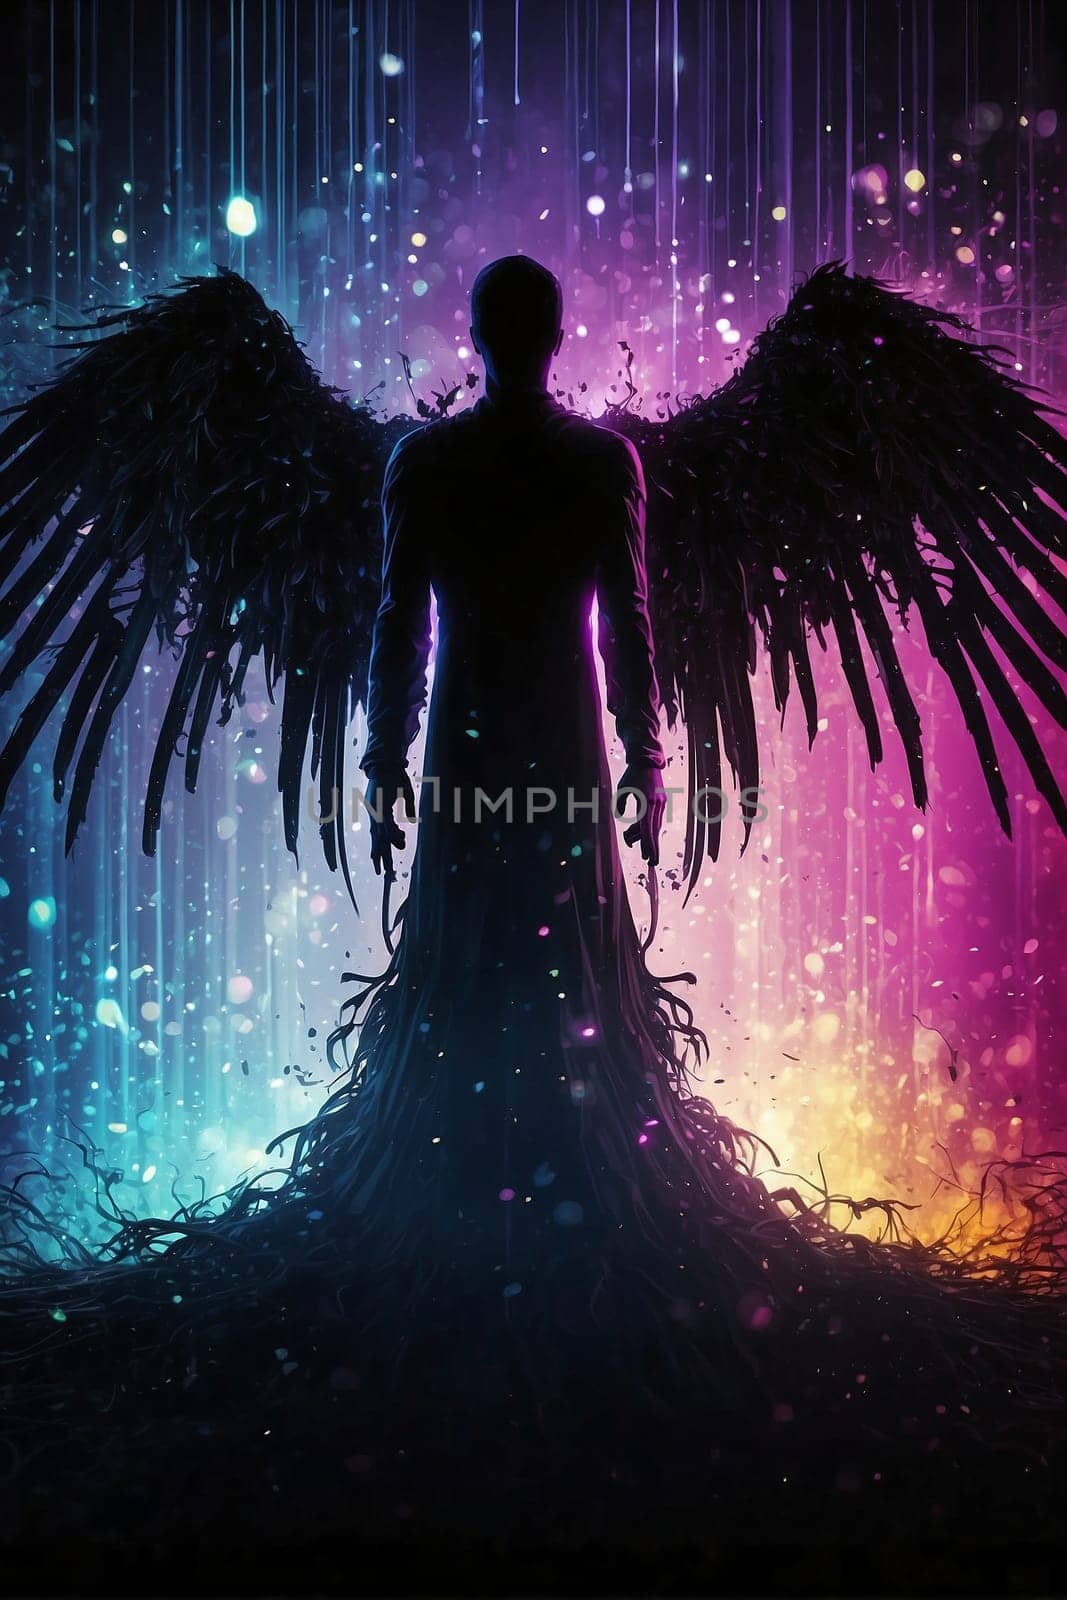 An angel stands against a vibrant backdrop, creating a striking visual composition.